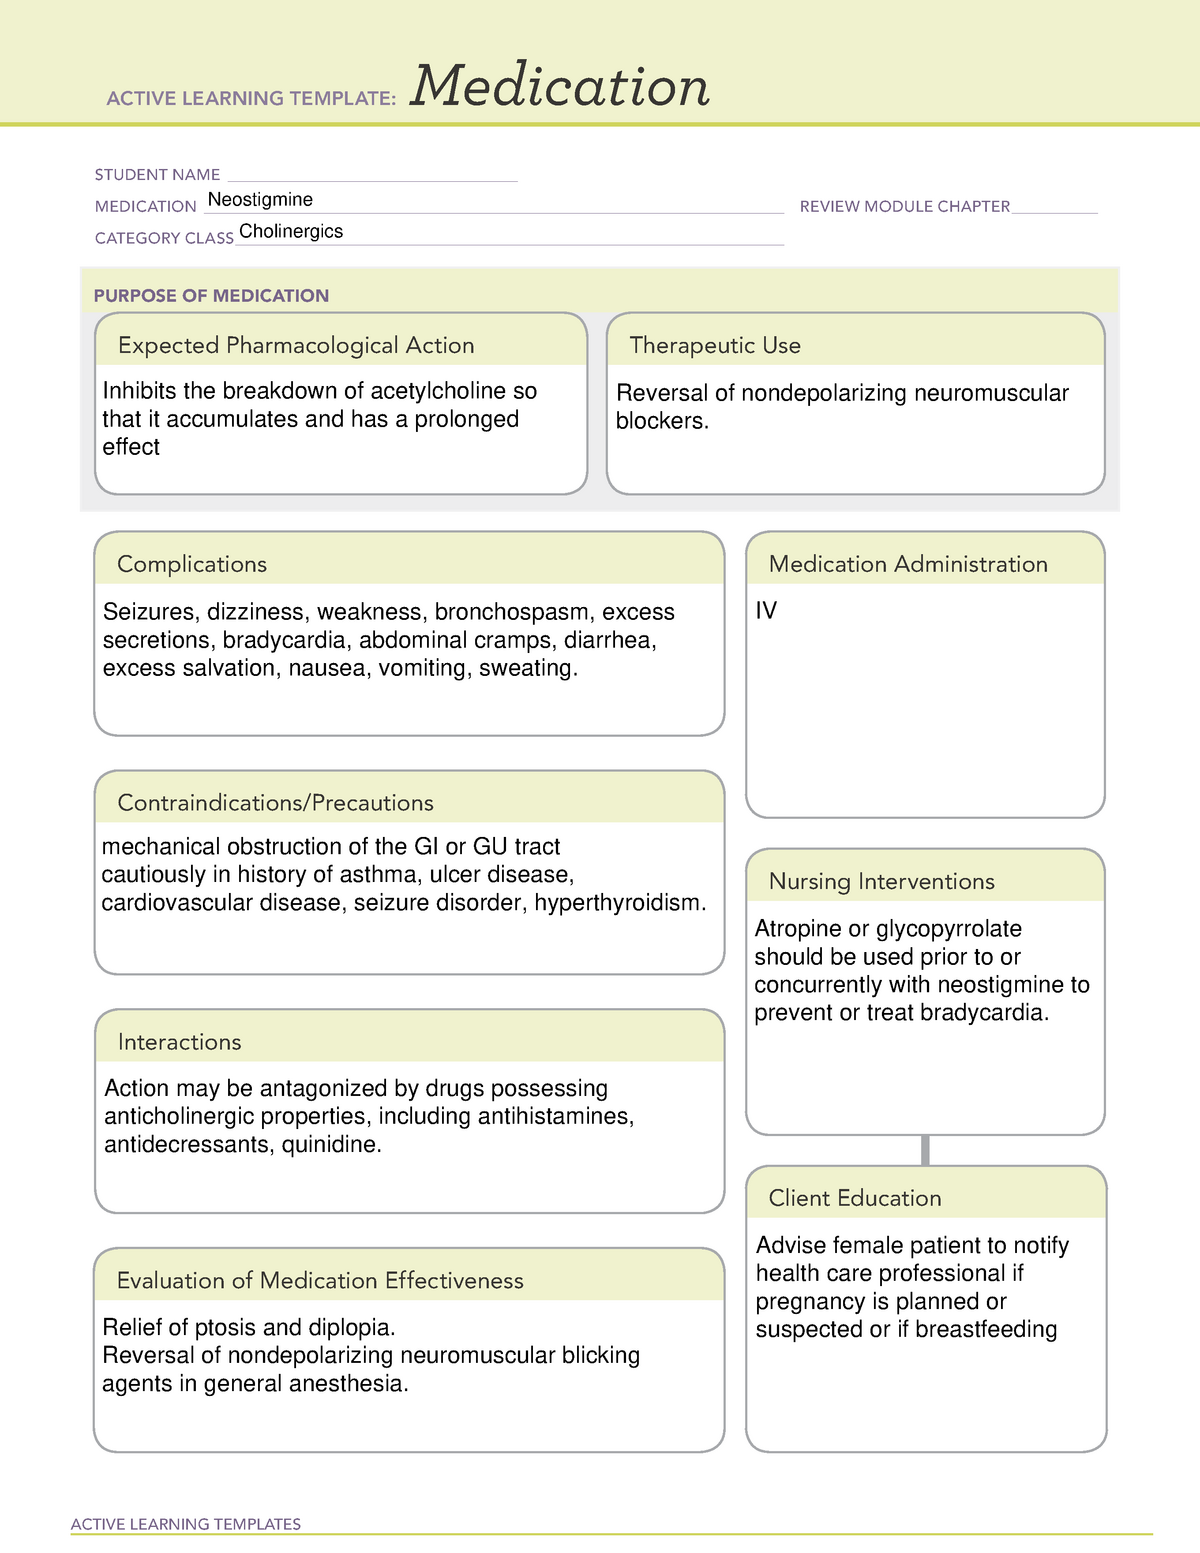 Medication Active Learning Template